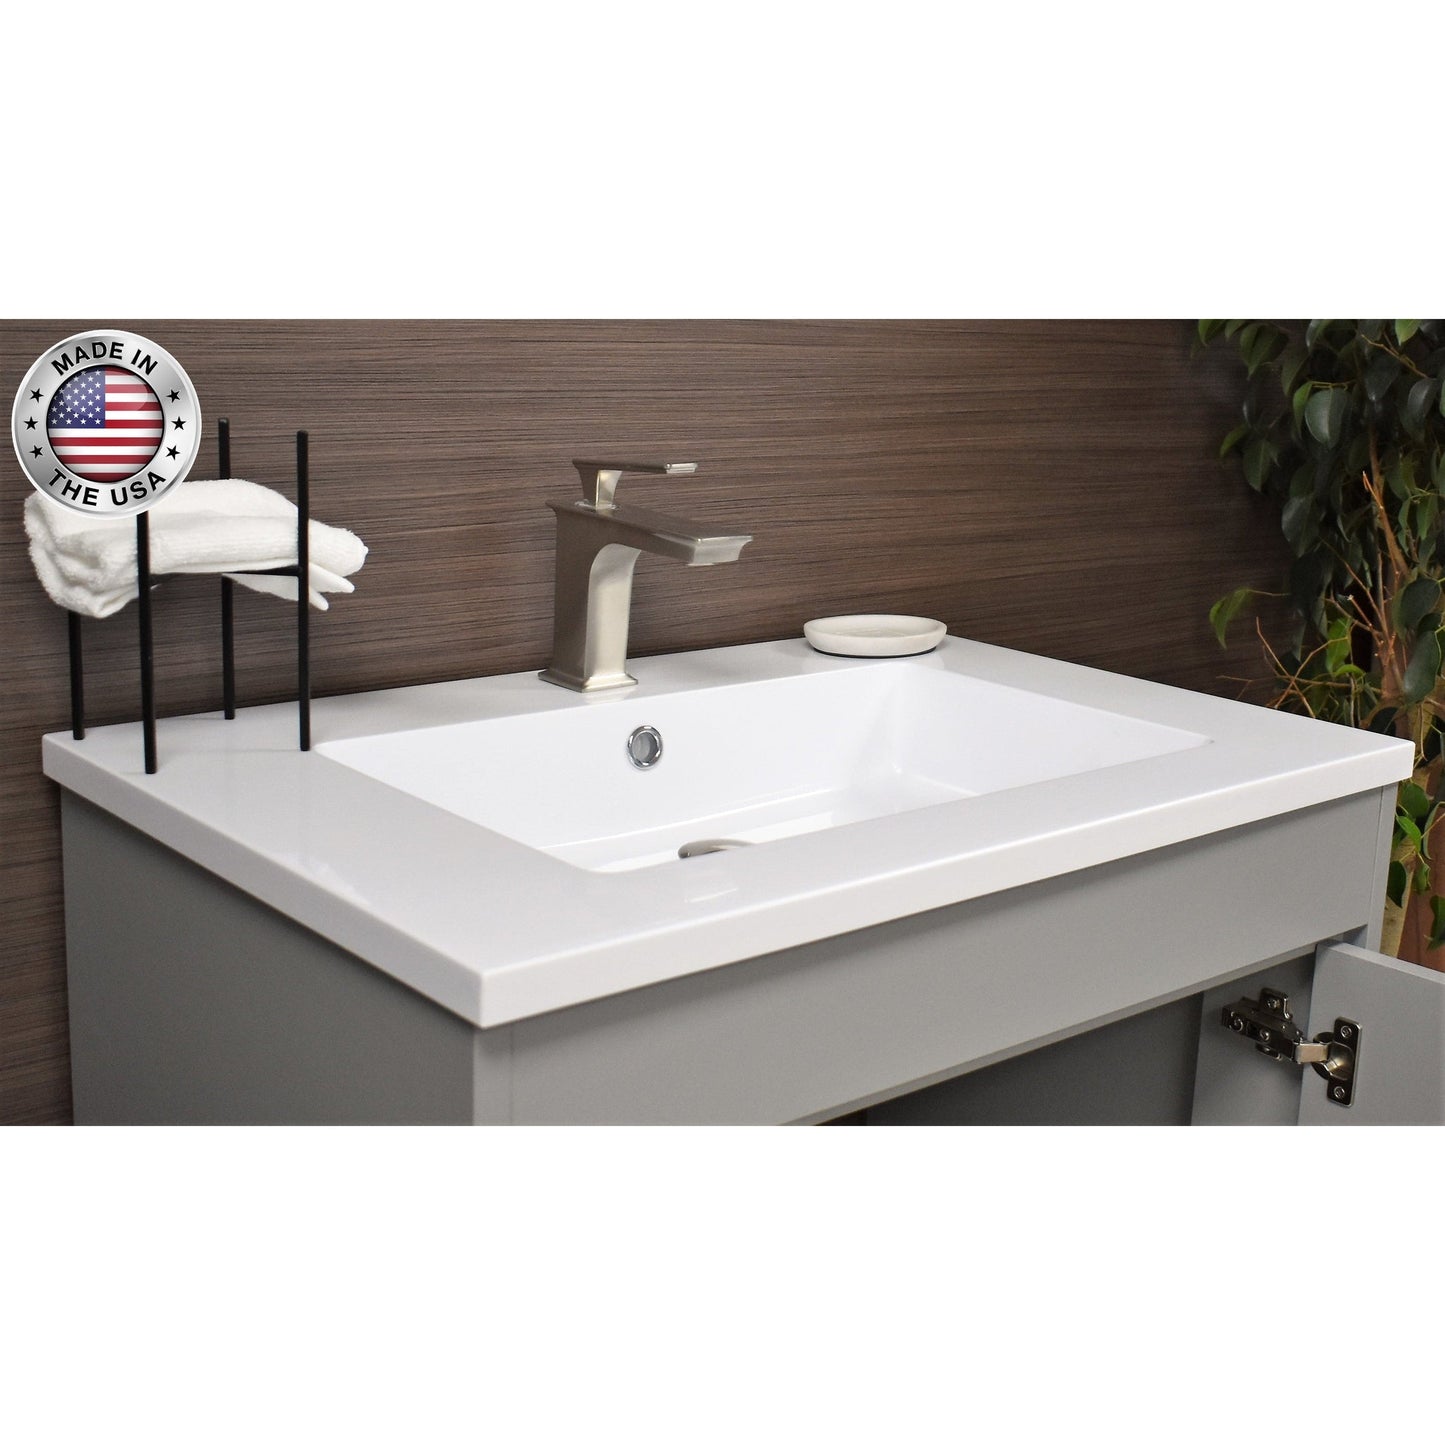 Volpa USA Rio 24" Gray Freestanding Modern Bathroom Vanity With Integrated Acrylic Top and Brushed Nickel Handles